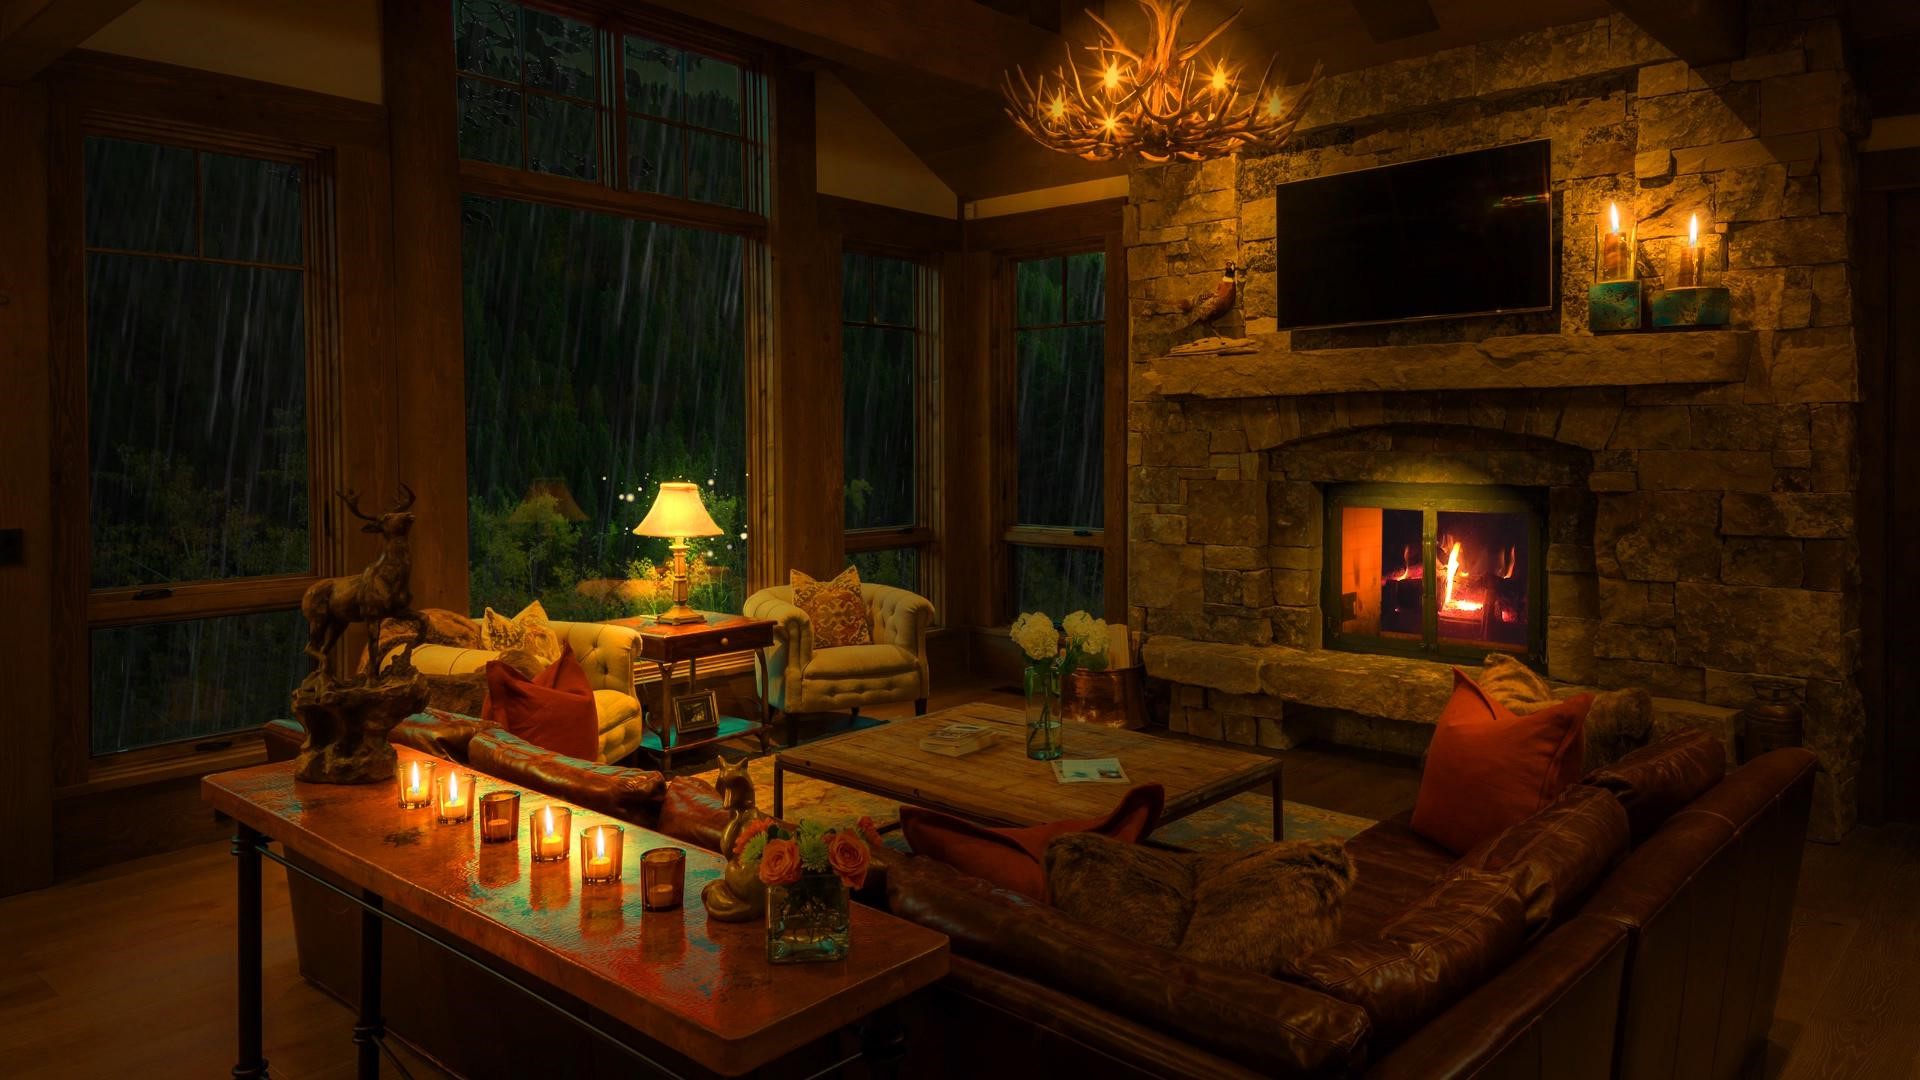 room, candles, interior, living rooms, architecture, fireplace, rain, house Gallery HD Wallpaper